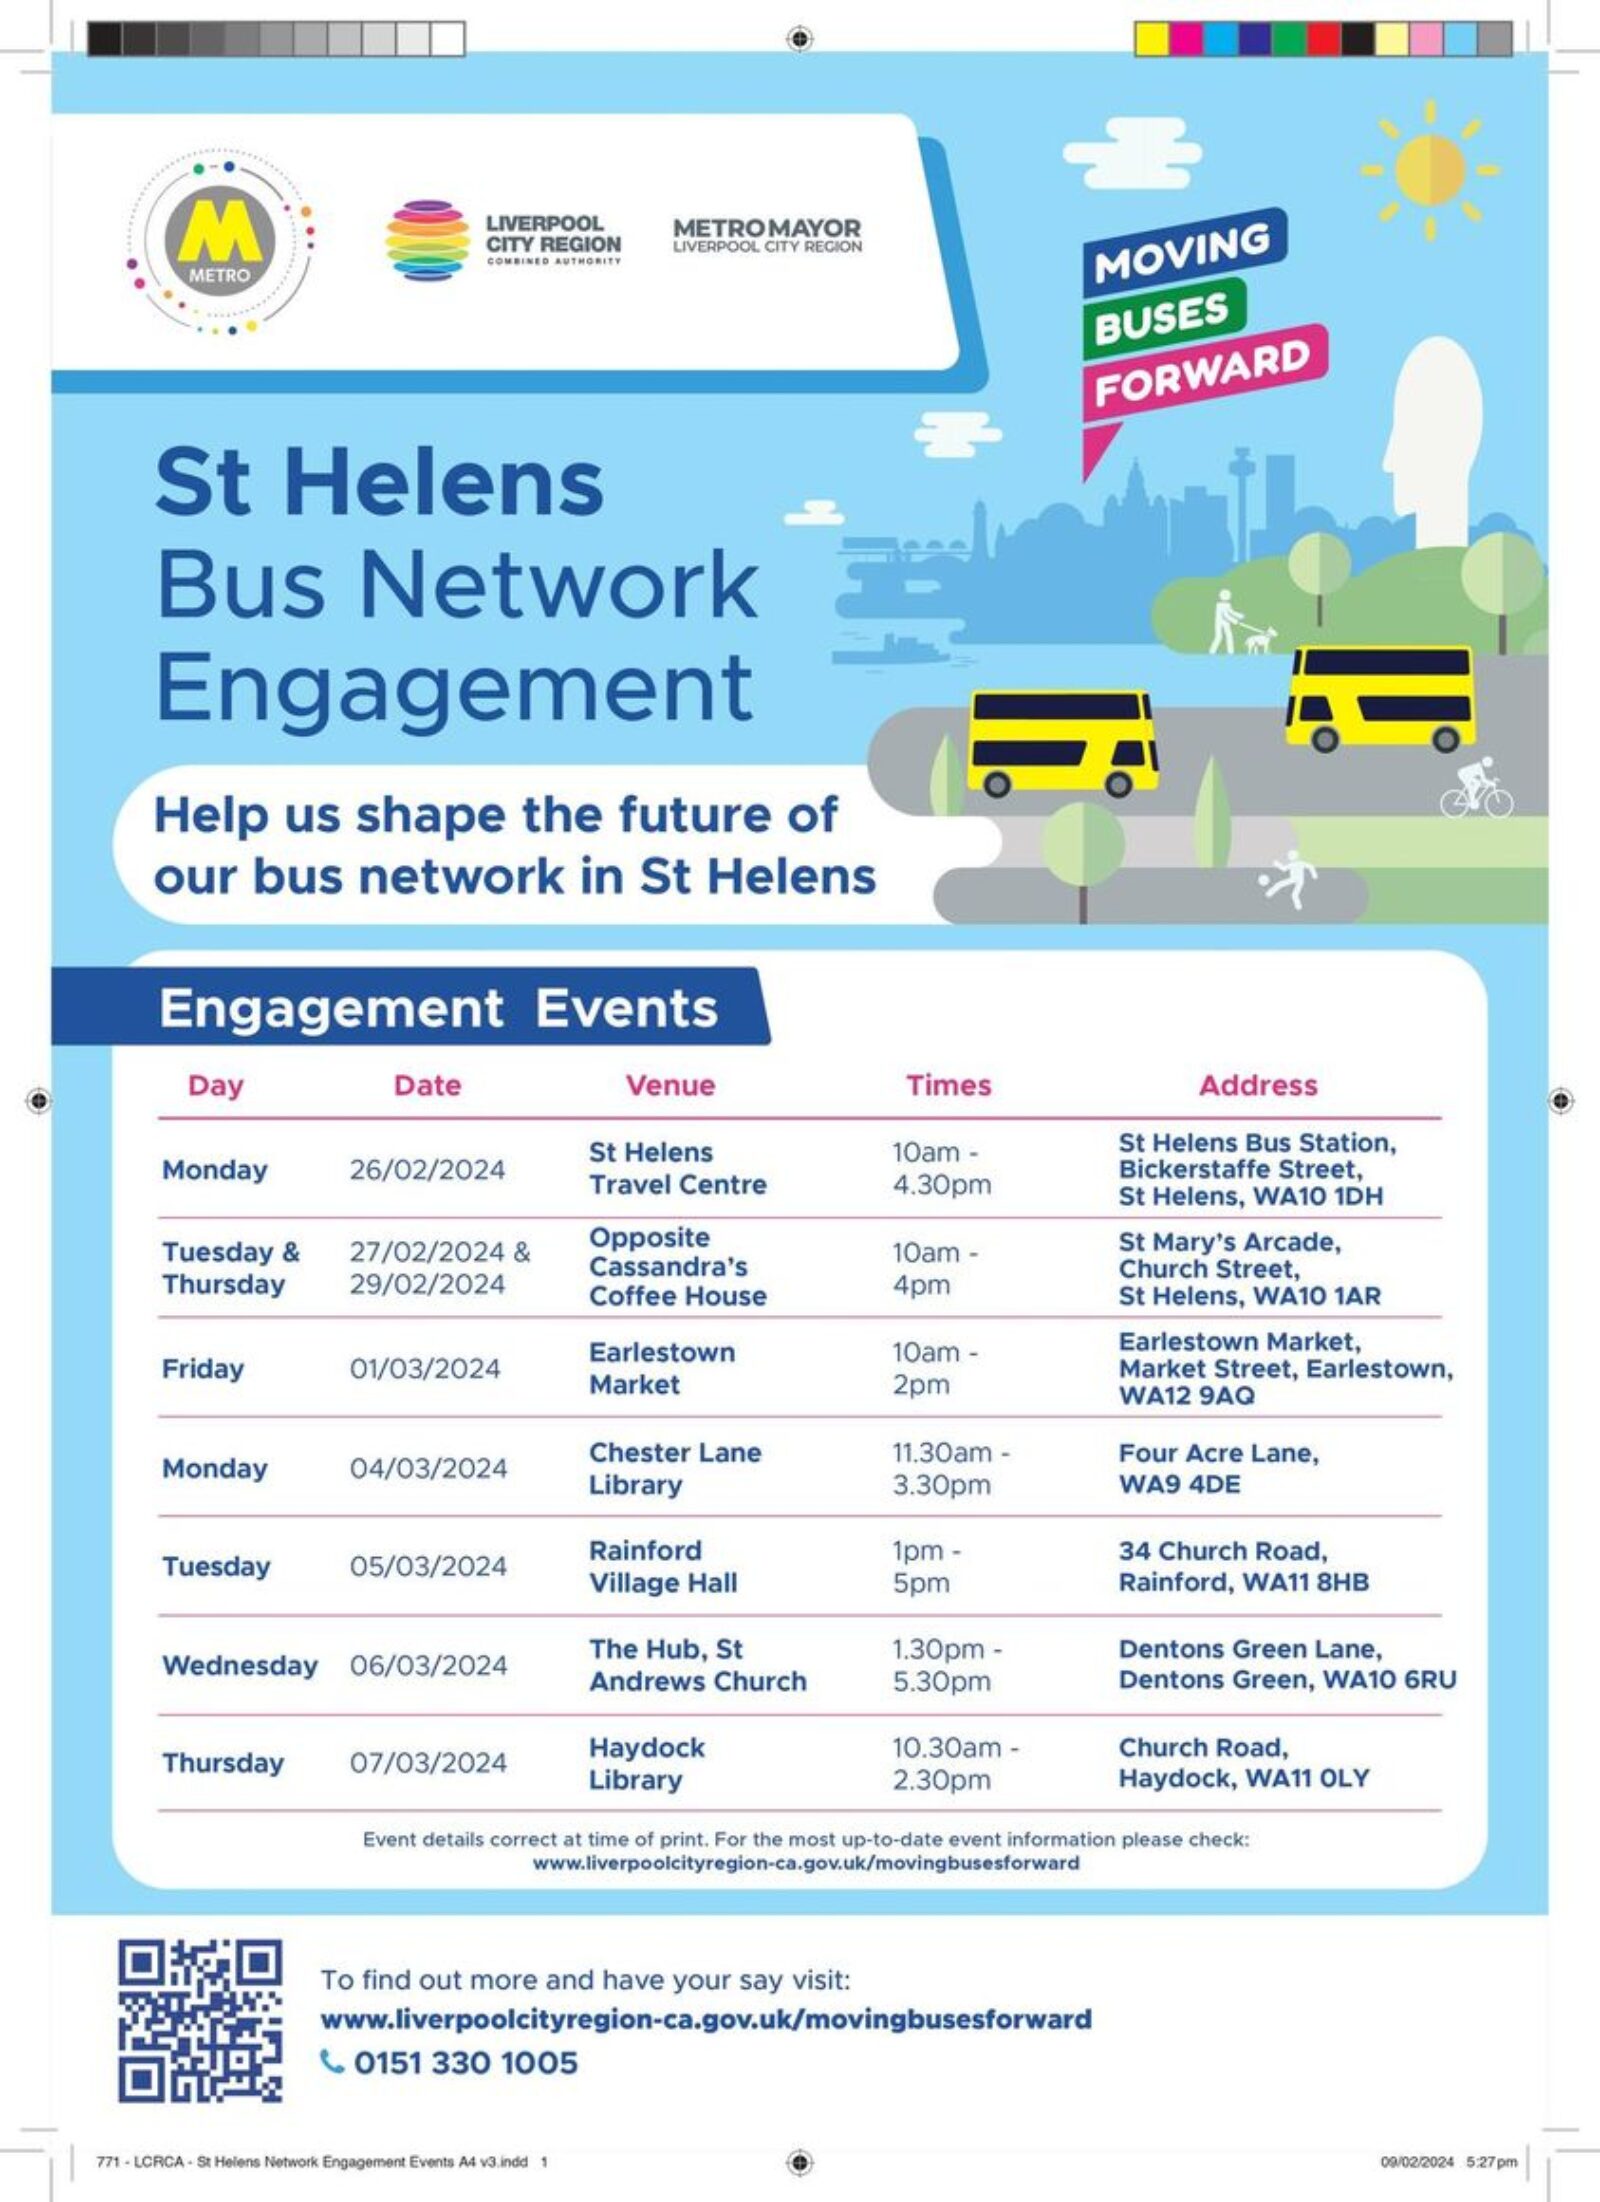 Image shows changes to St Helens bus route. Please see https://www.sthelens.gov.uk/ for more details. 